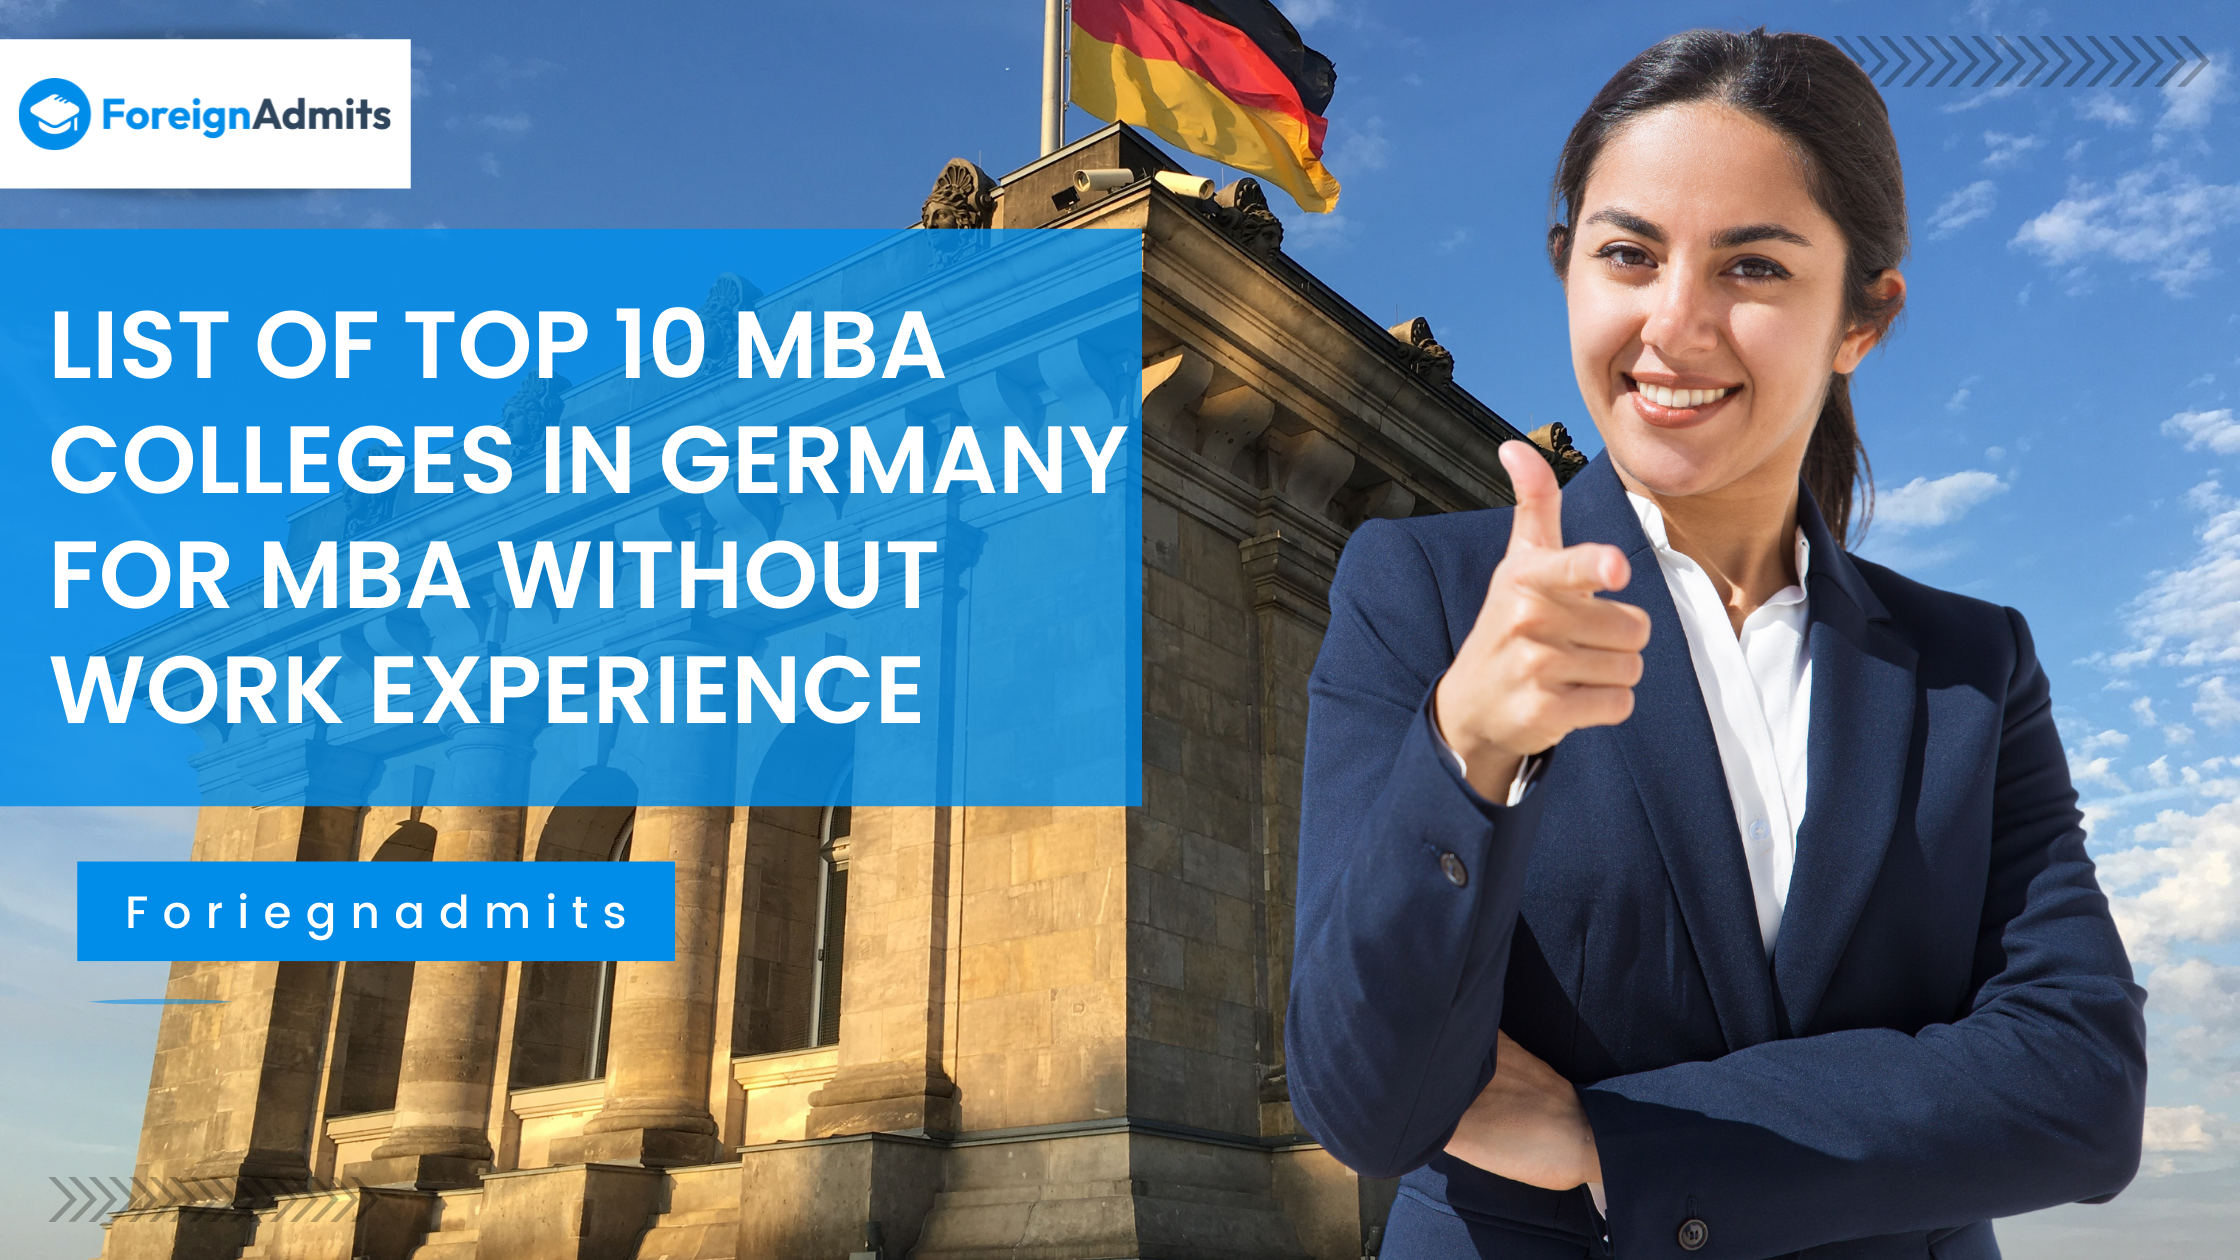 List of Top 10 MBA Colleges in Germany for MBA Without Work Experience